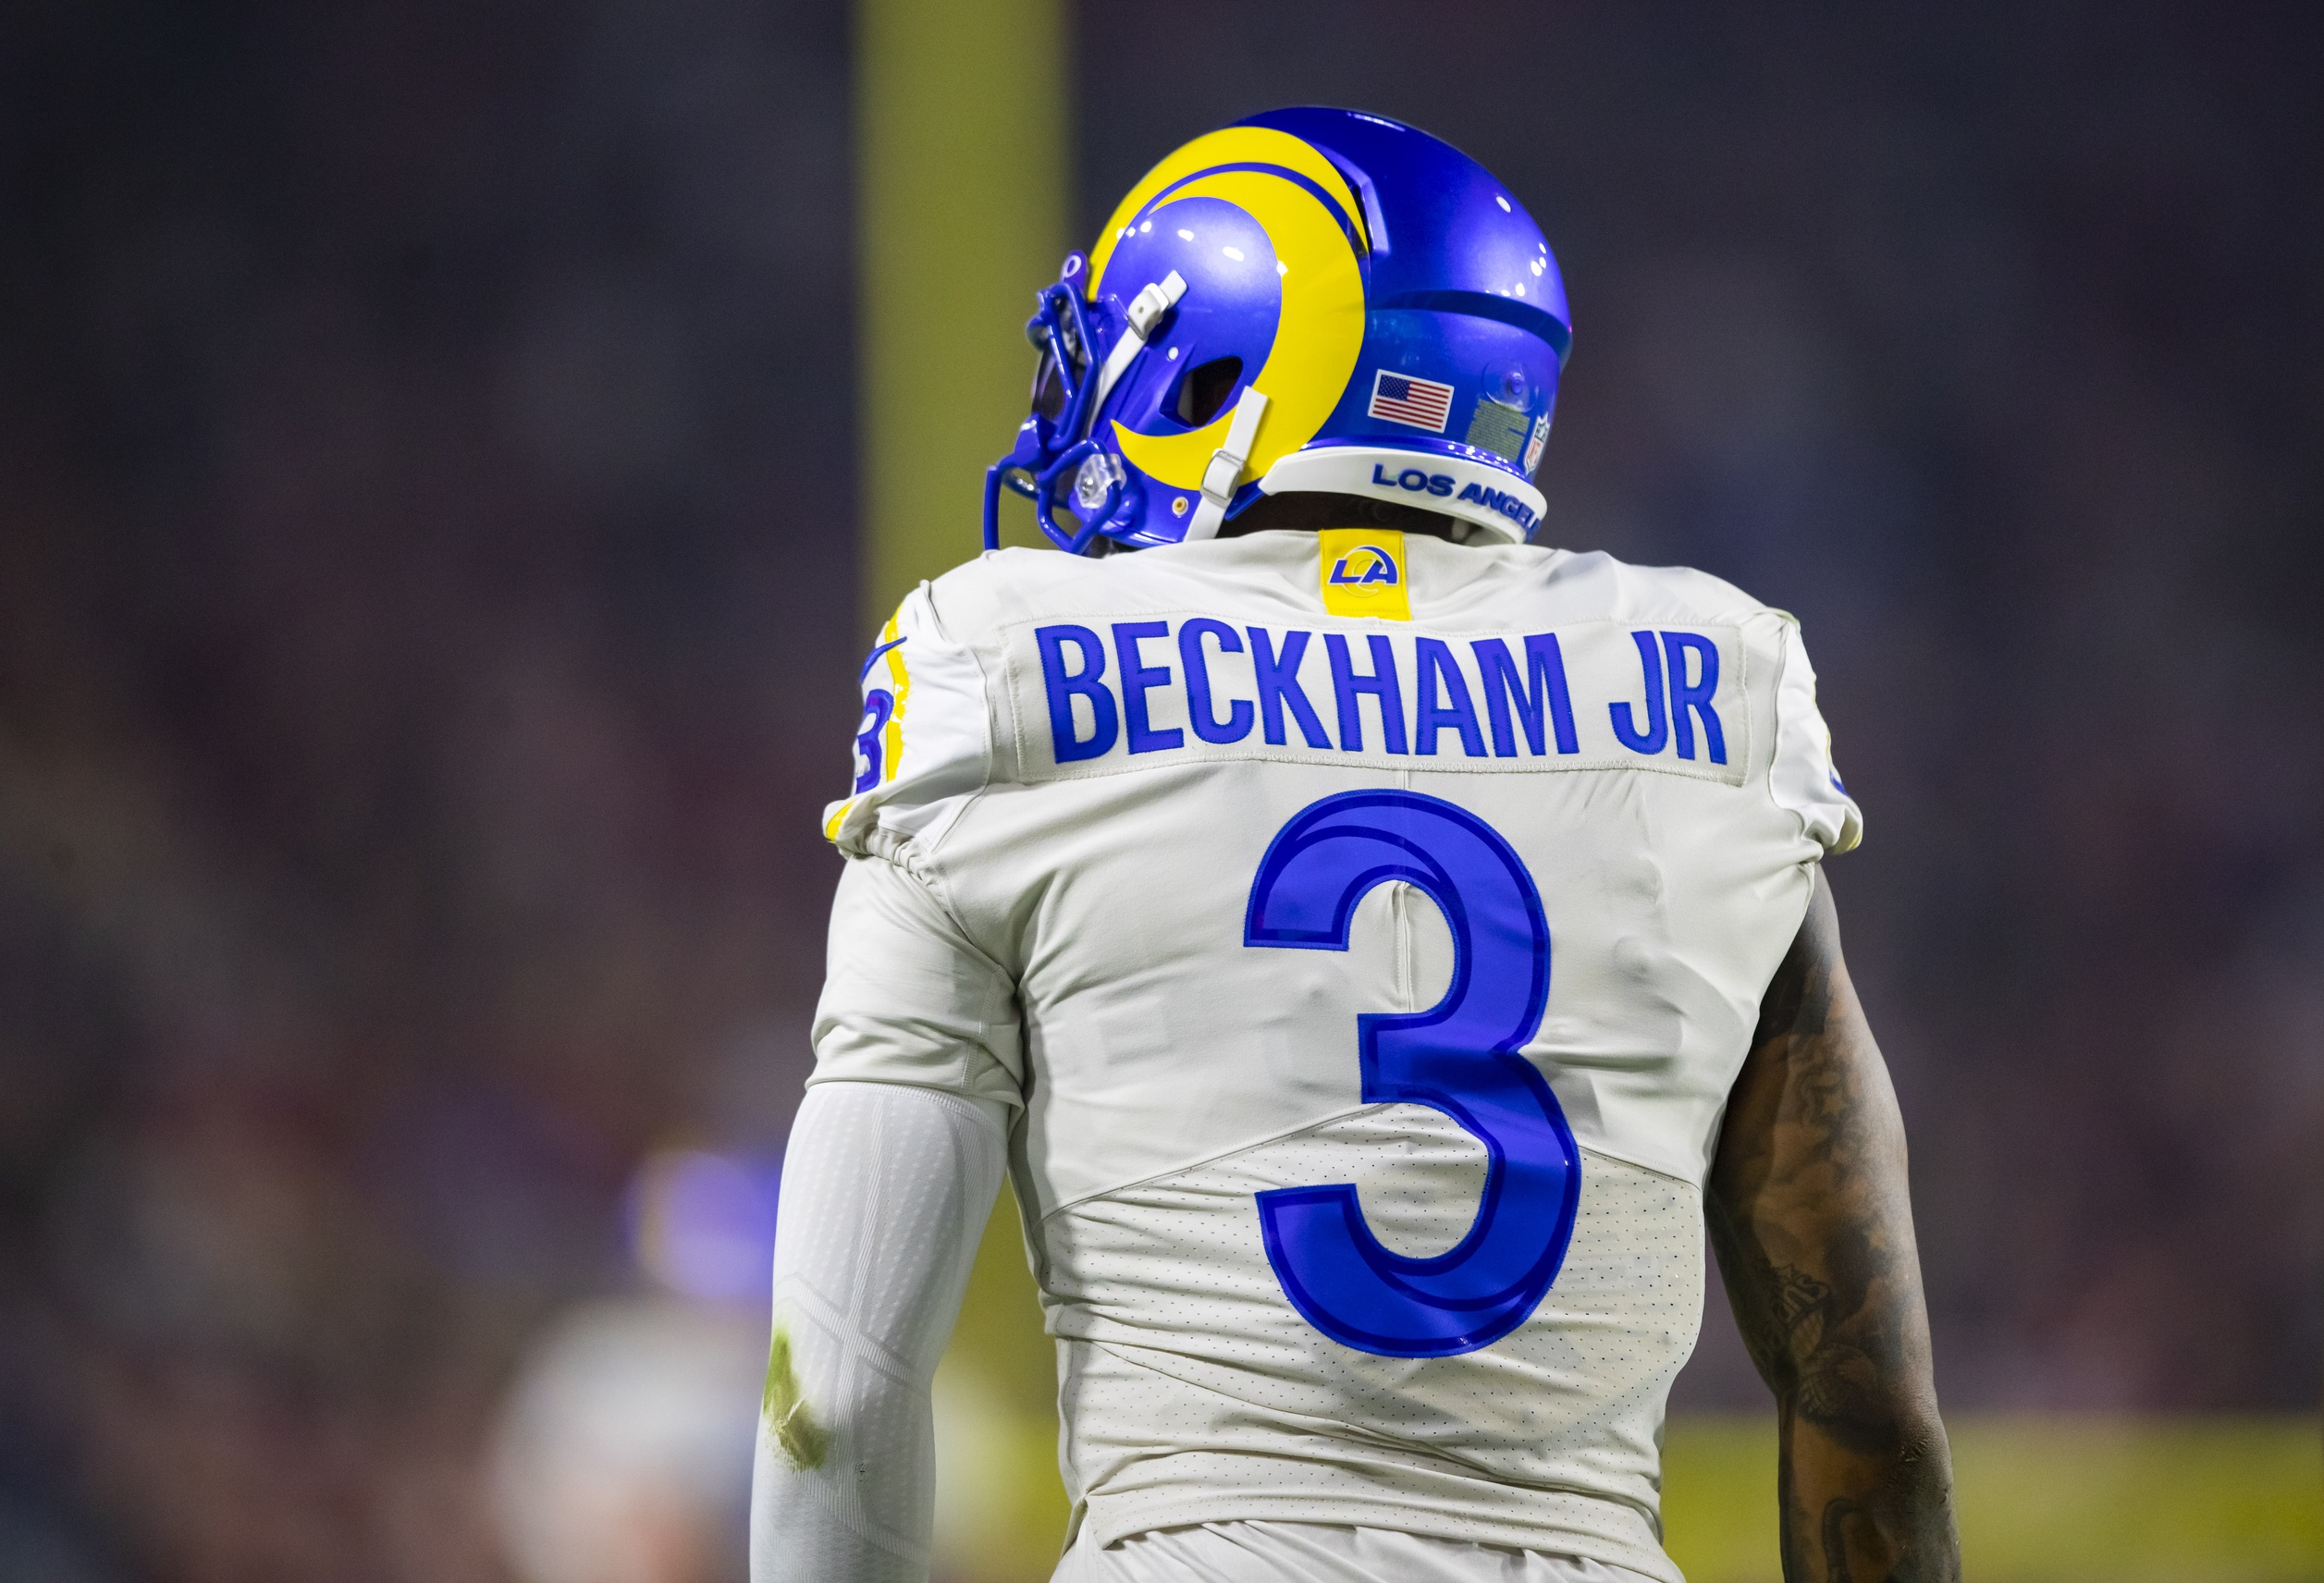 NFL Free Agency 2023: Best Remaining Free Agents After the Official Start  Include Lamar Jackson, Odell Beckham Jr., and Dalton Schultz